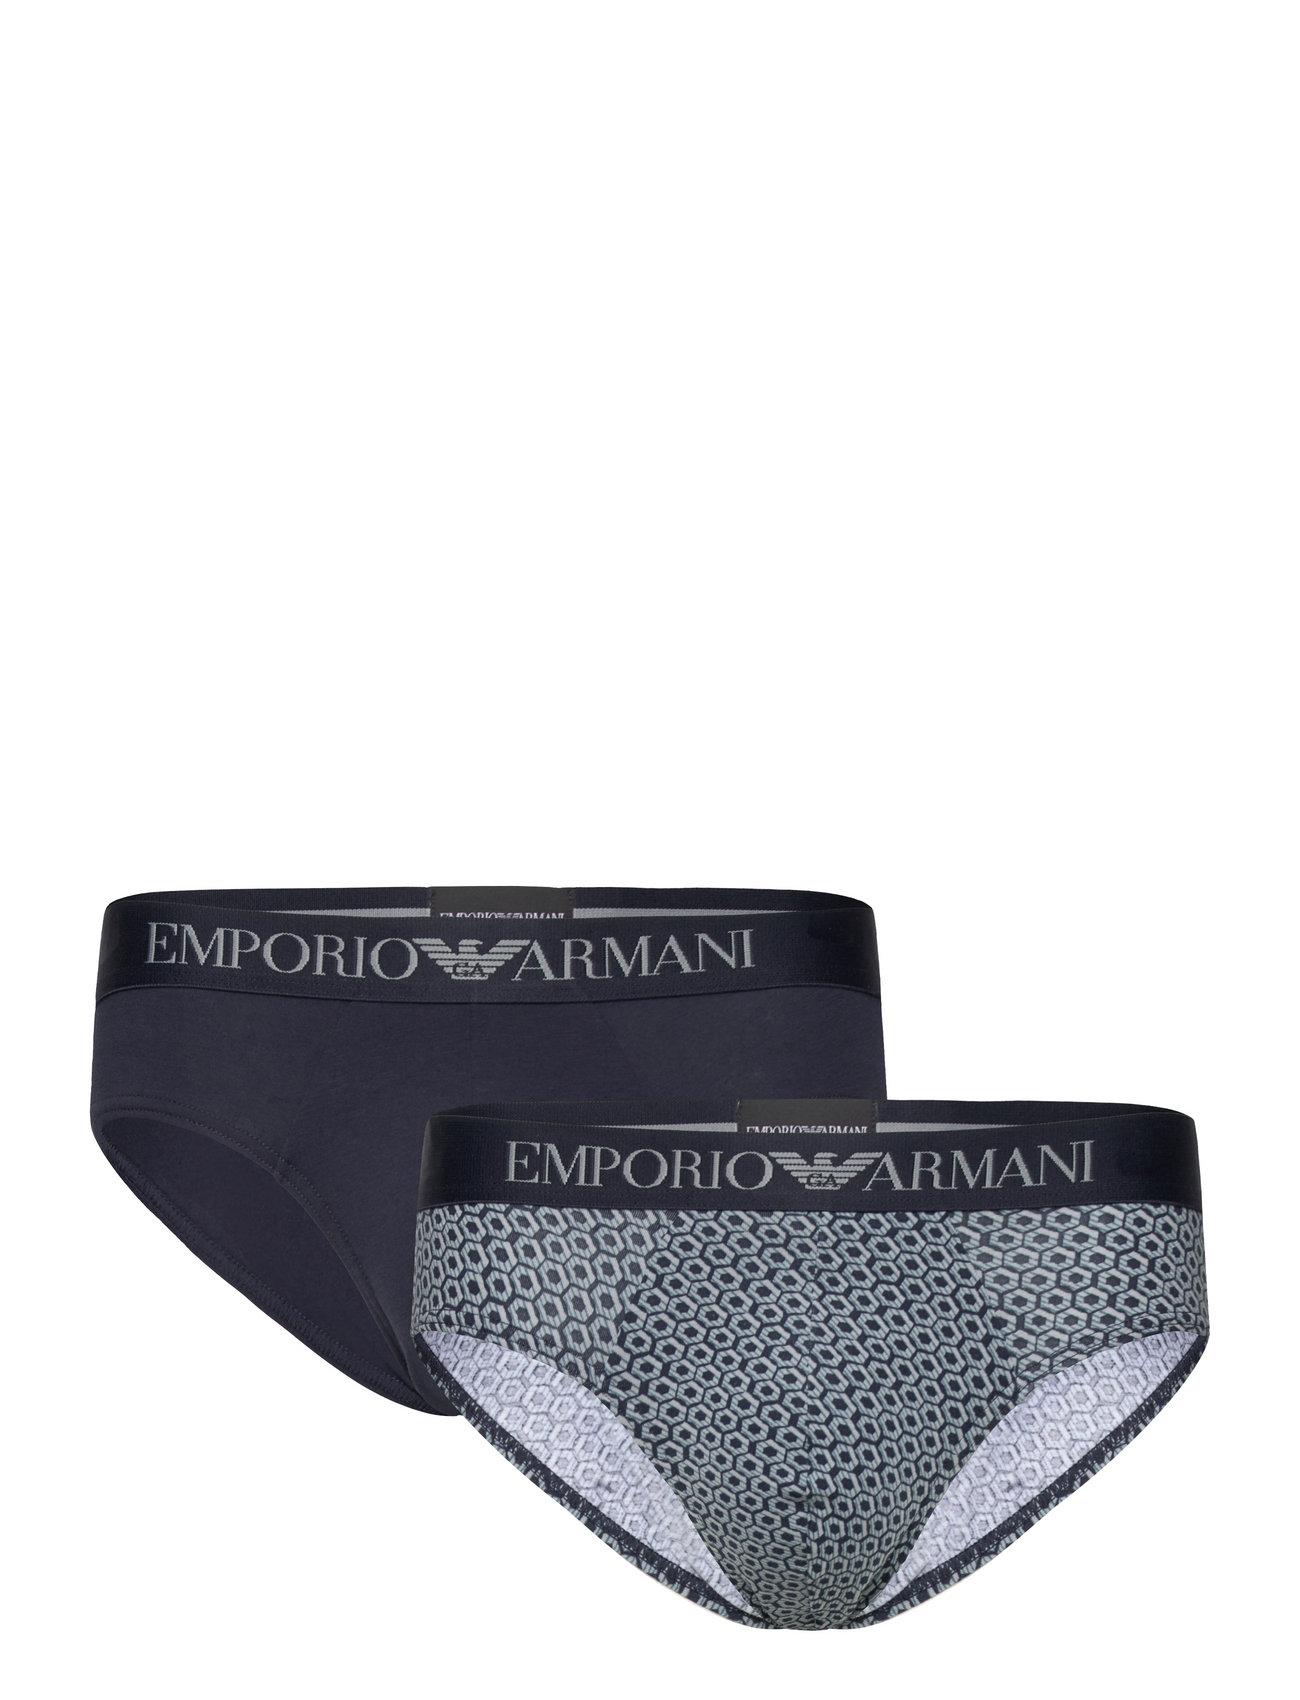 Emporio Armani Knit Trunk 2-Pack Charcoal/Lime 111210-4P717-10843